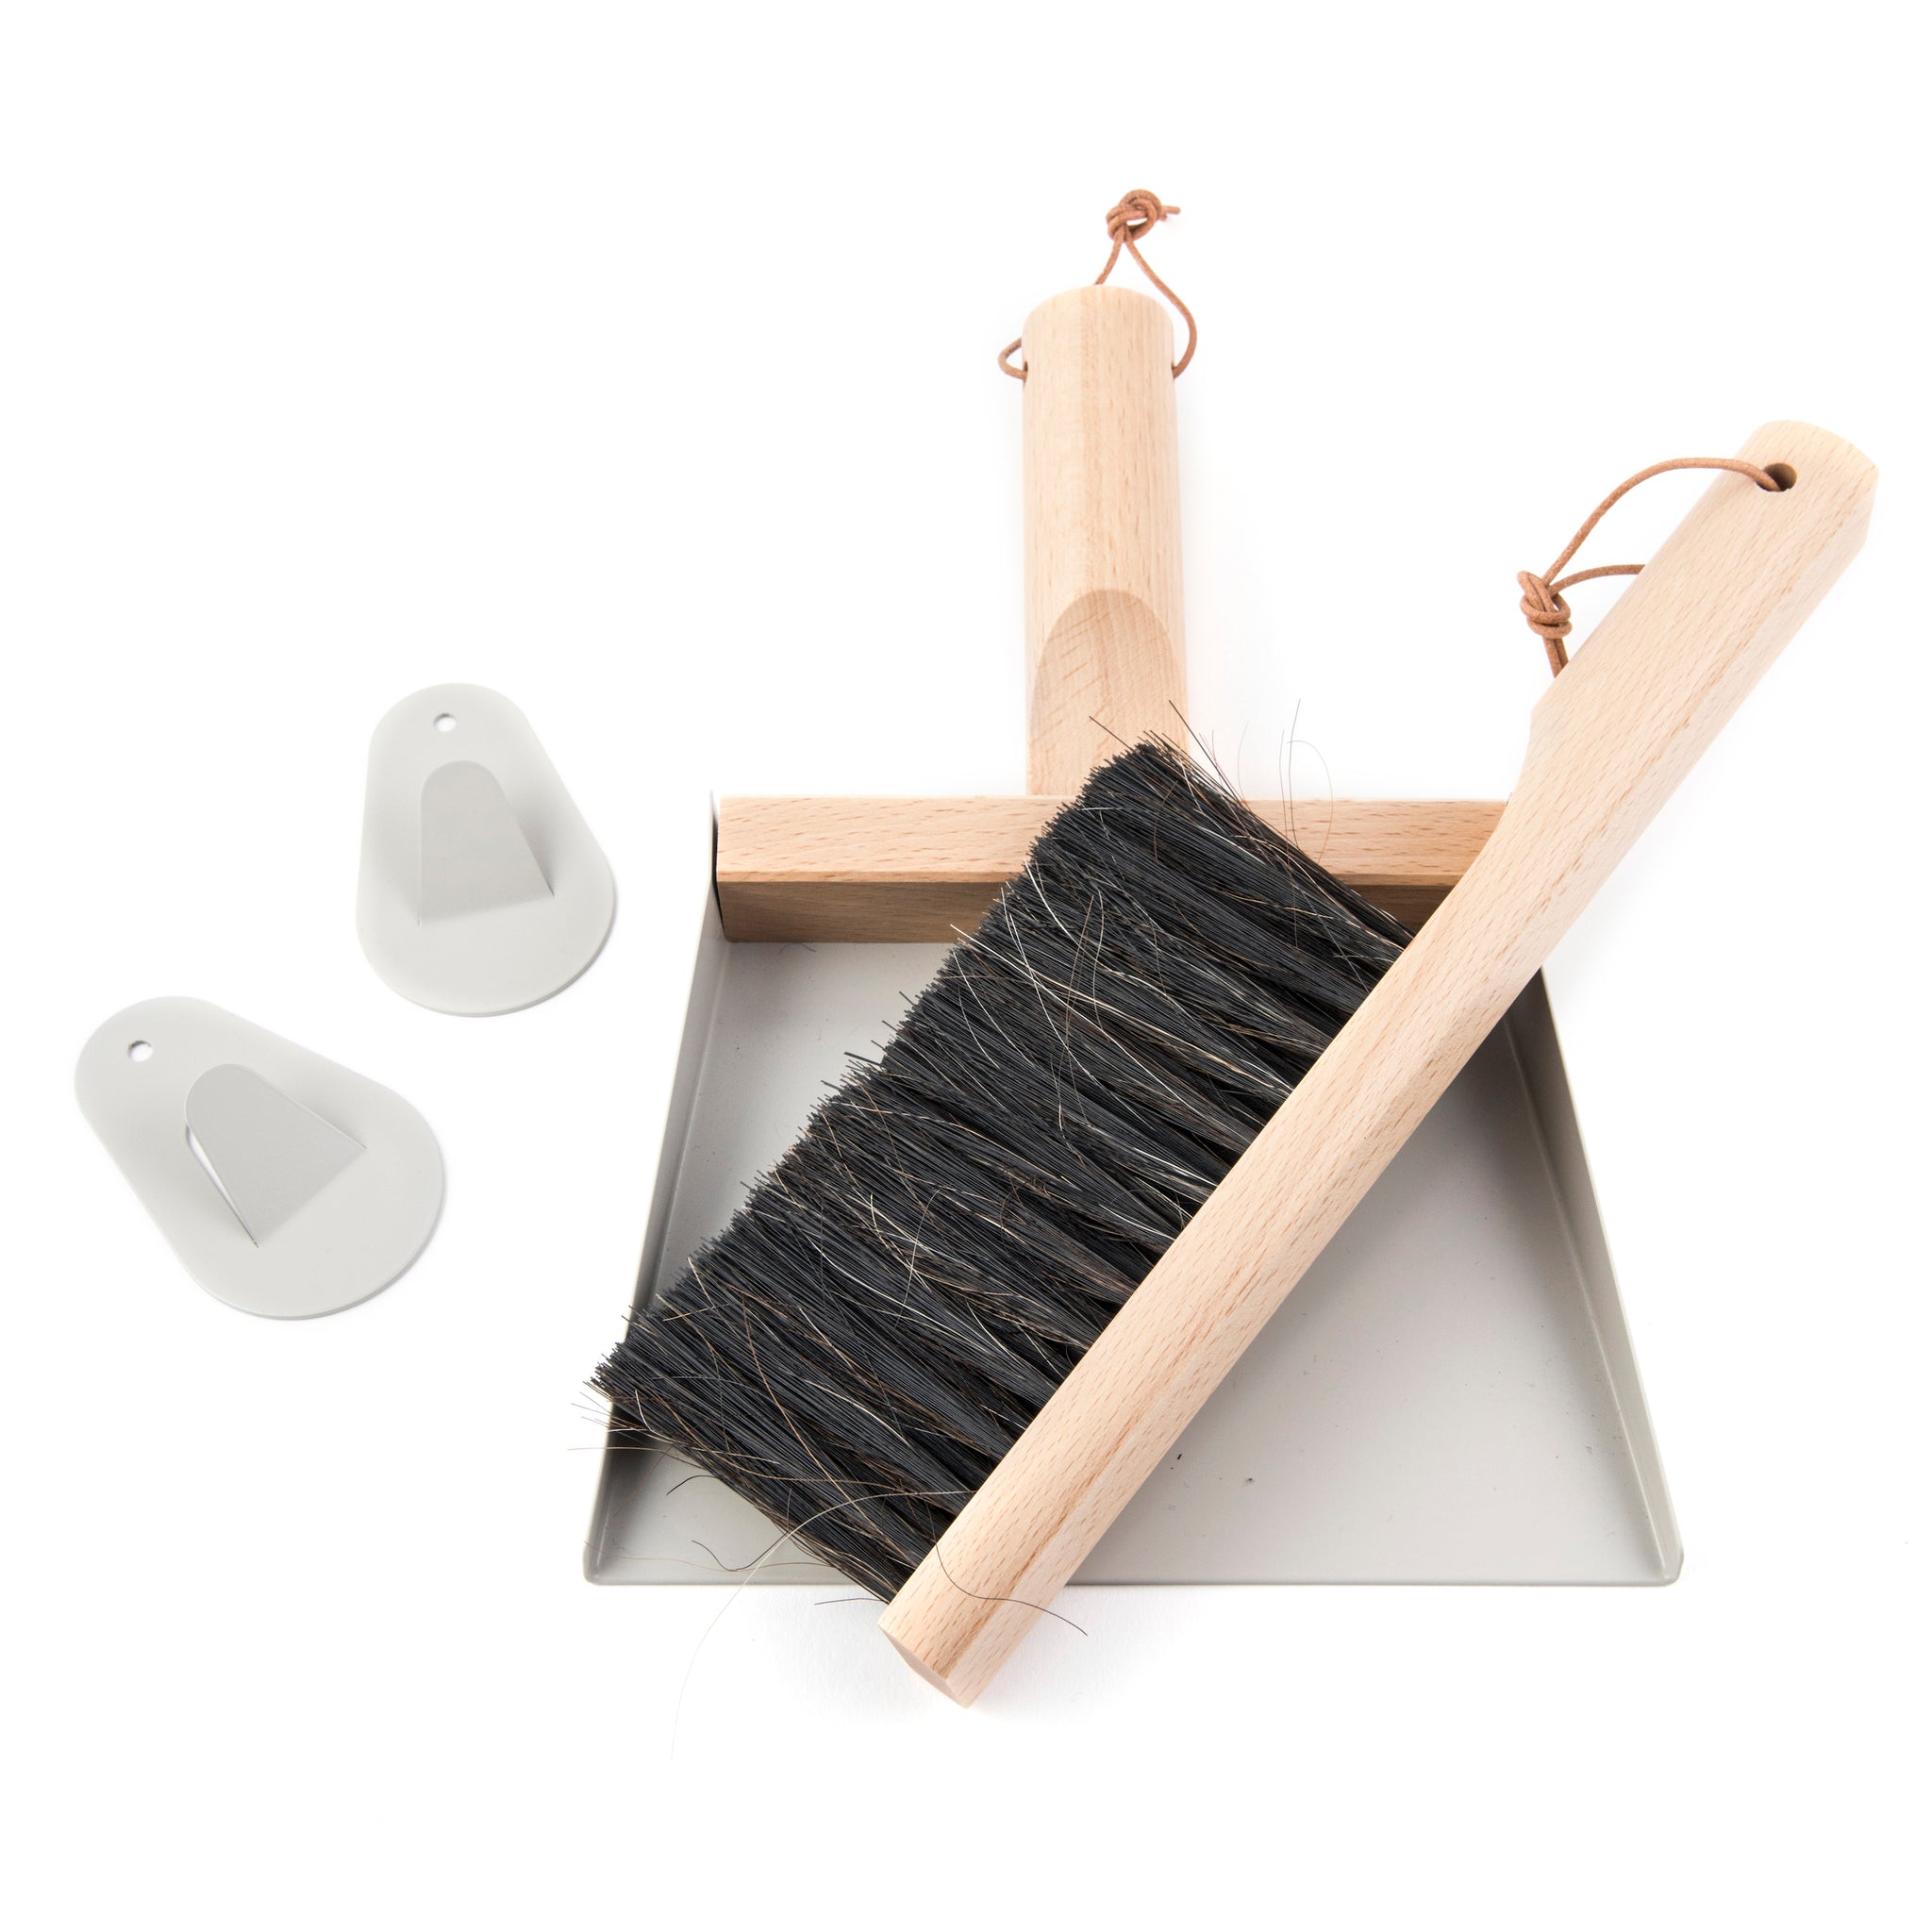 Andrée Jardin Mr. and Mrs. Clynk Grey Dustpan & Brush "Coffret" Gift Set with Wall Hooks